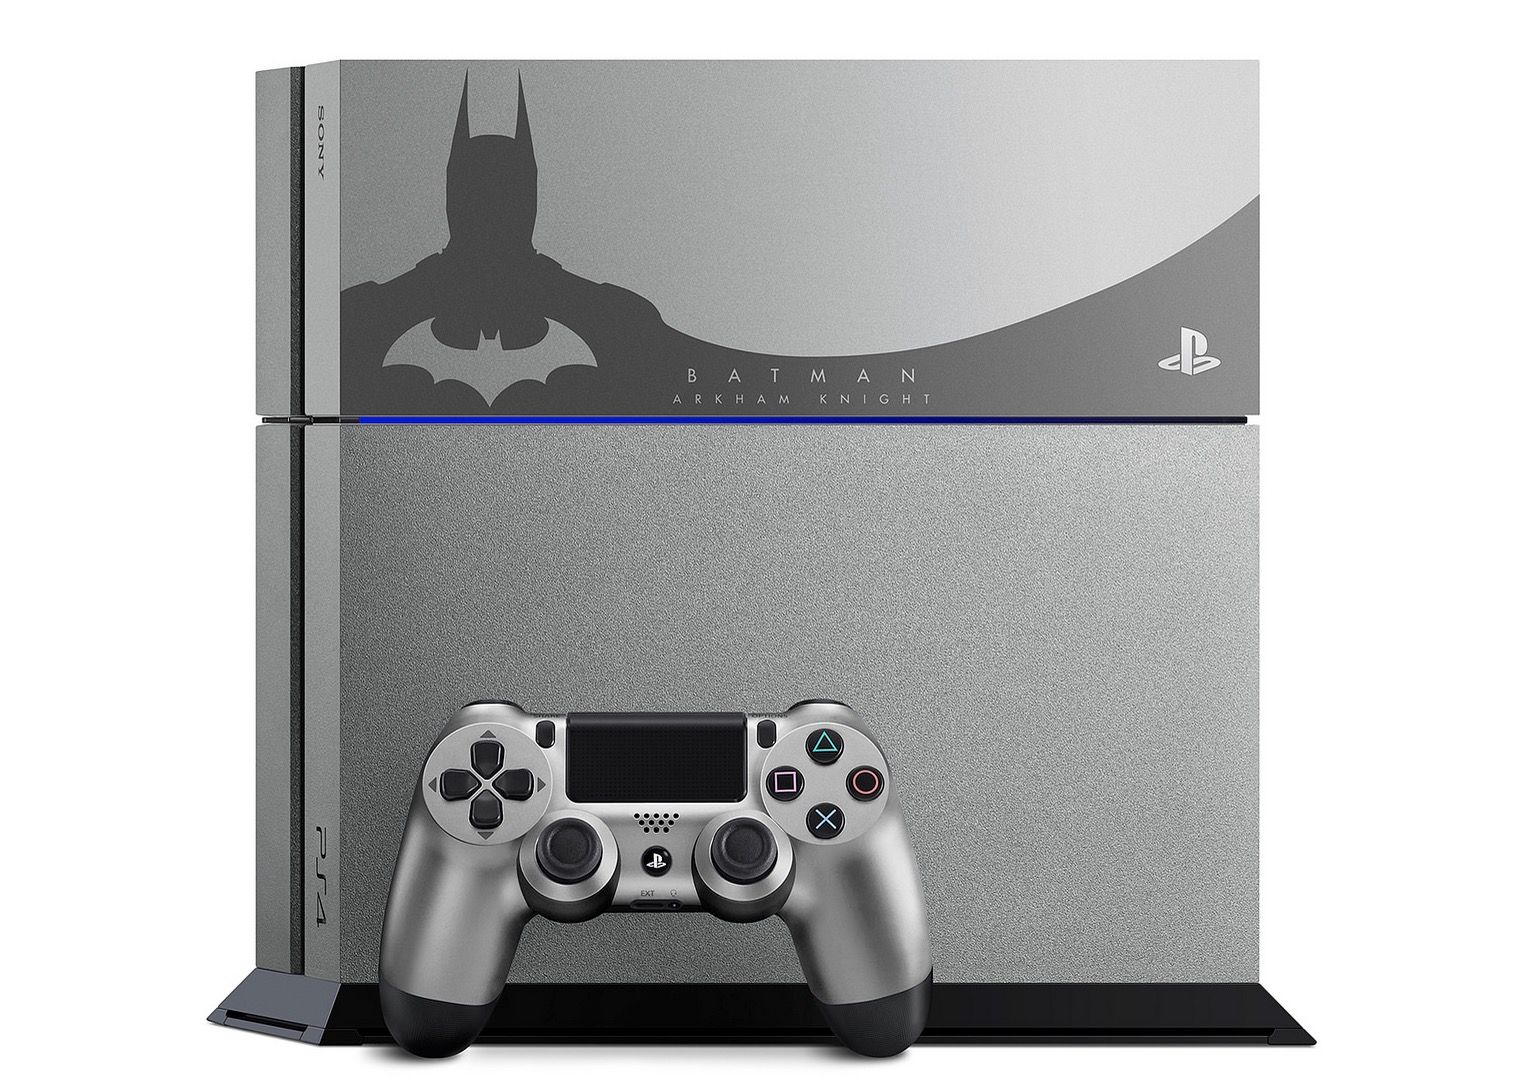 sony unveils batman arkham knight limited edition ps4 and more image 1